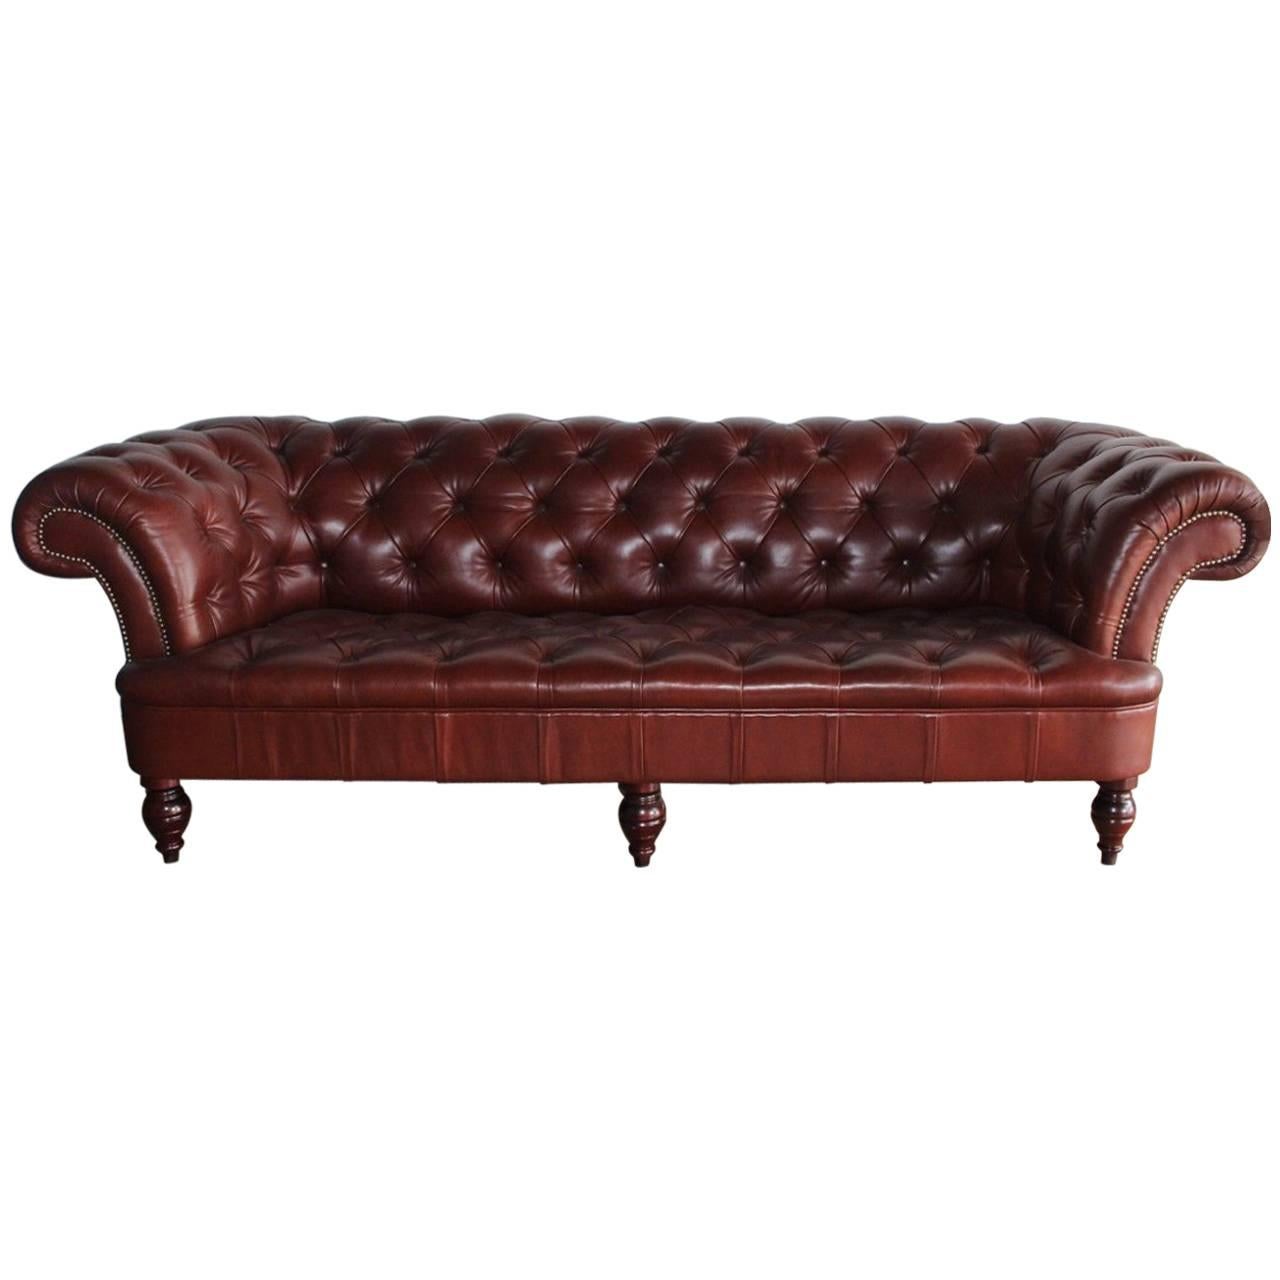 Genuine Designer George Smith Chesterfield Leather Sofa For Sale